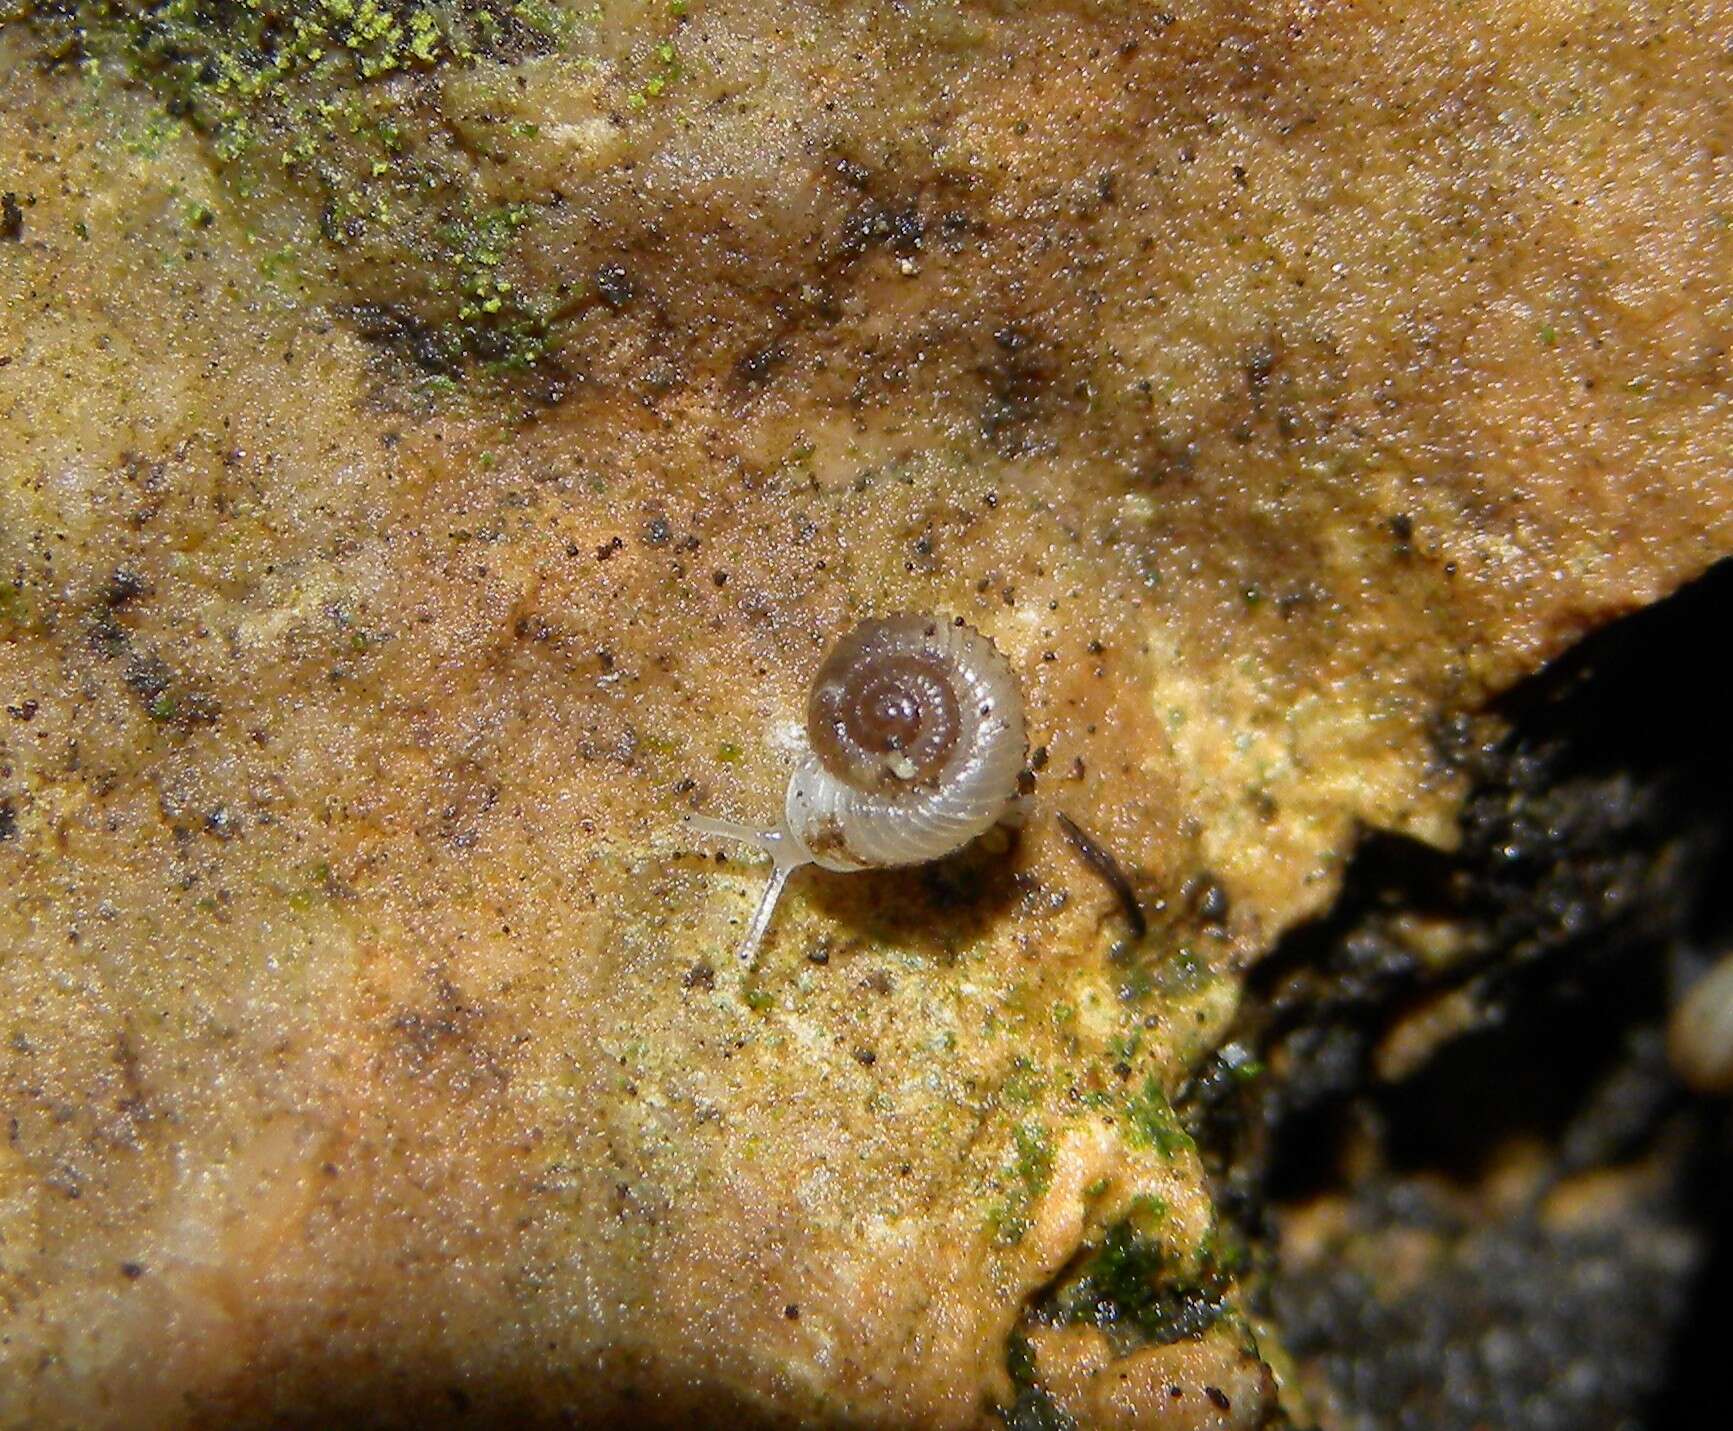 Image of ribbed grass snail